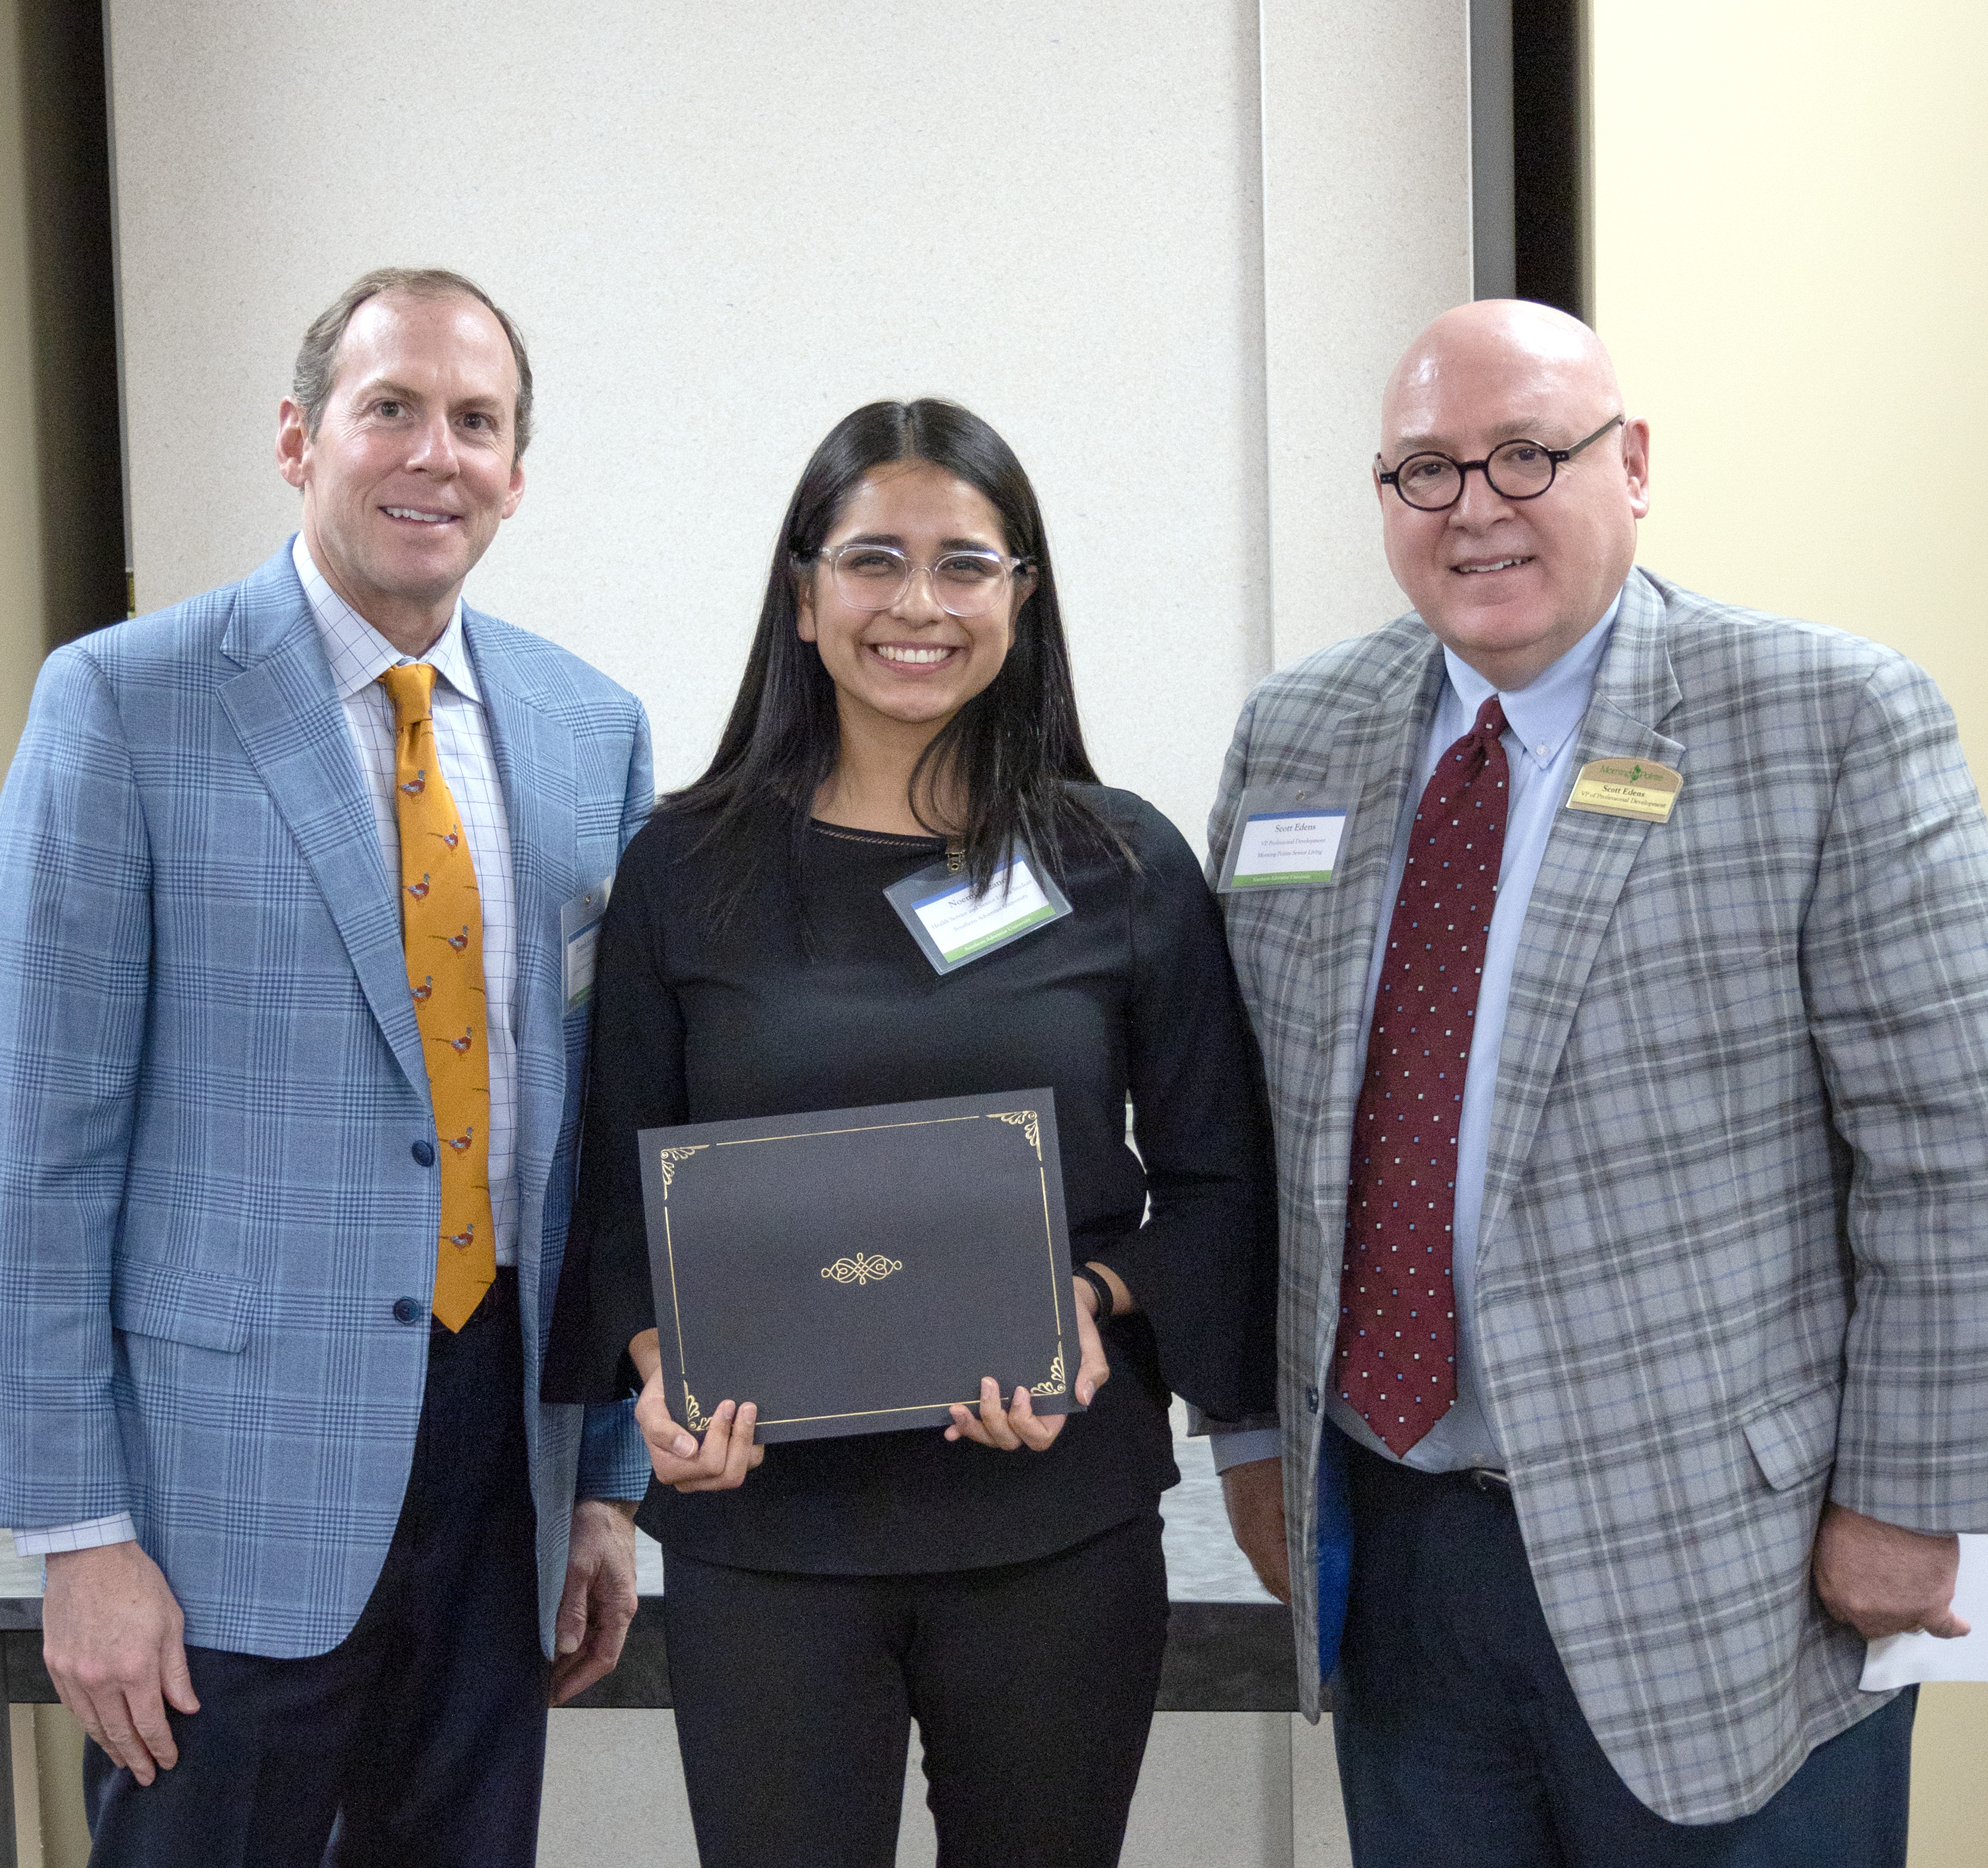 Noemi Lozano is presented with the scholarship by Franklin Farrow and Scott Edens of Morning Pointe.